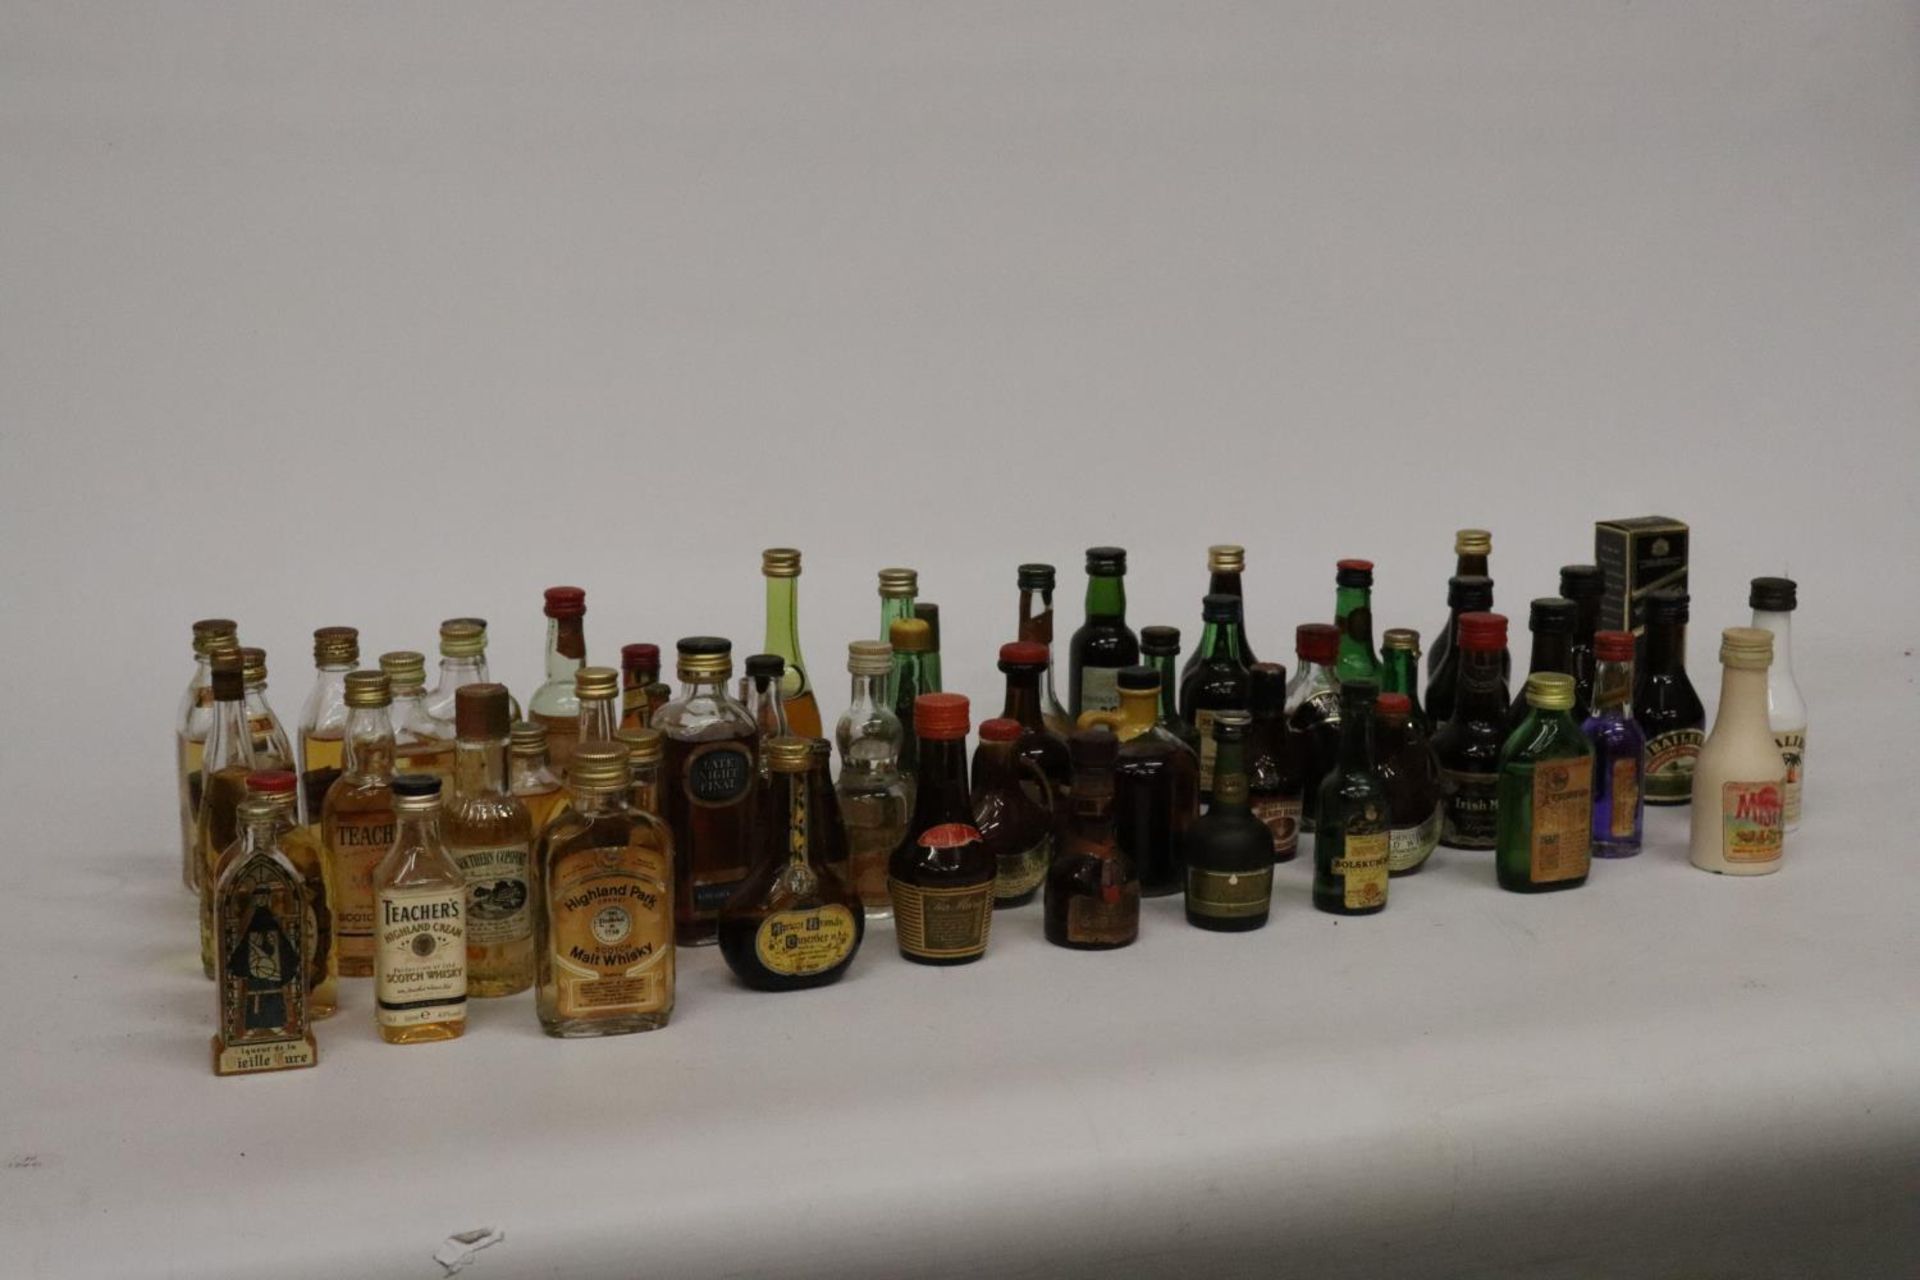 A LARGE QUANTITY OF MINIATURE BOTTLES OF ALCOHOL - Image 9 of 10